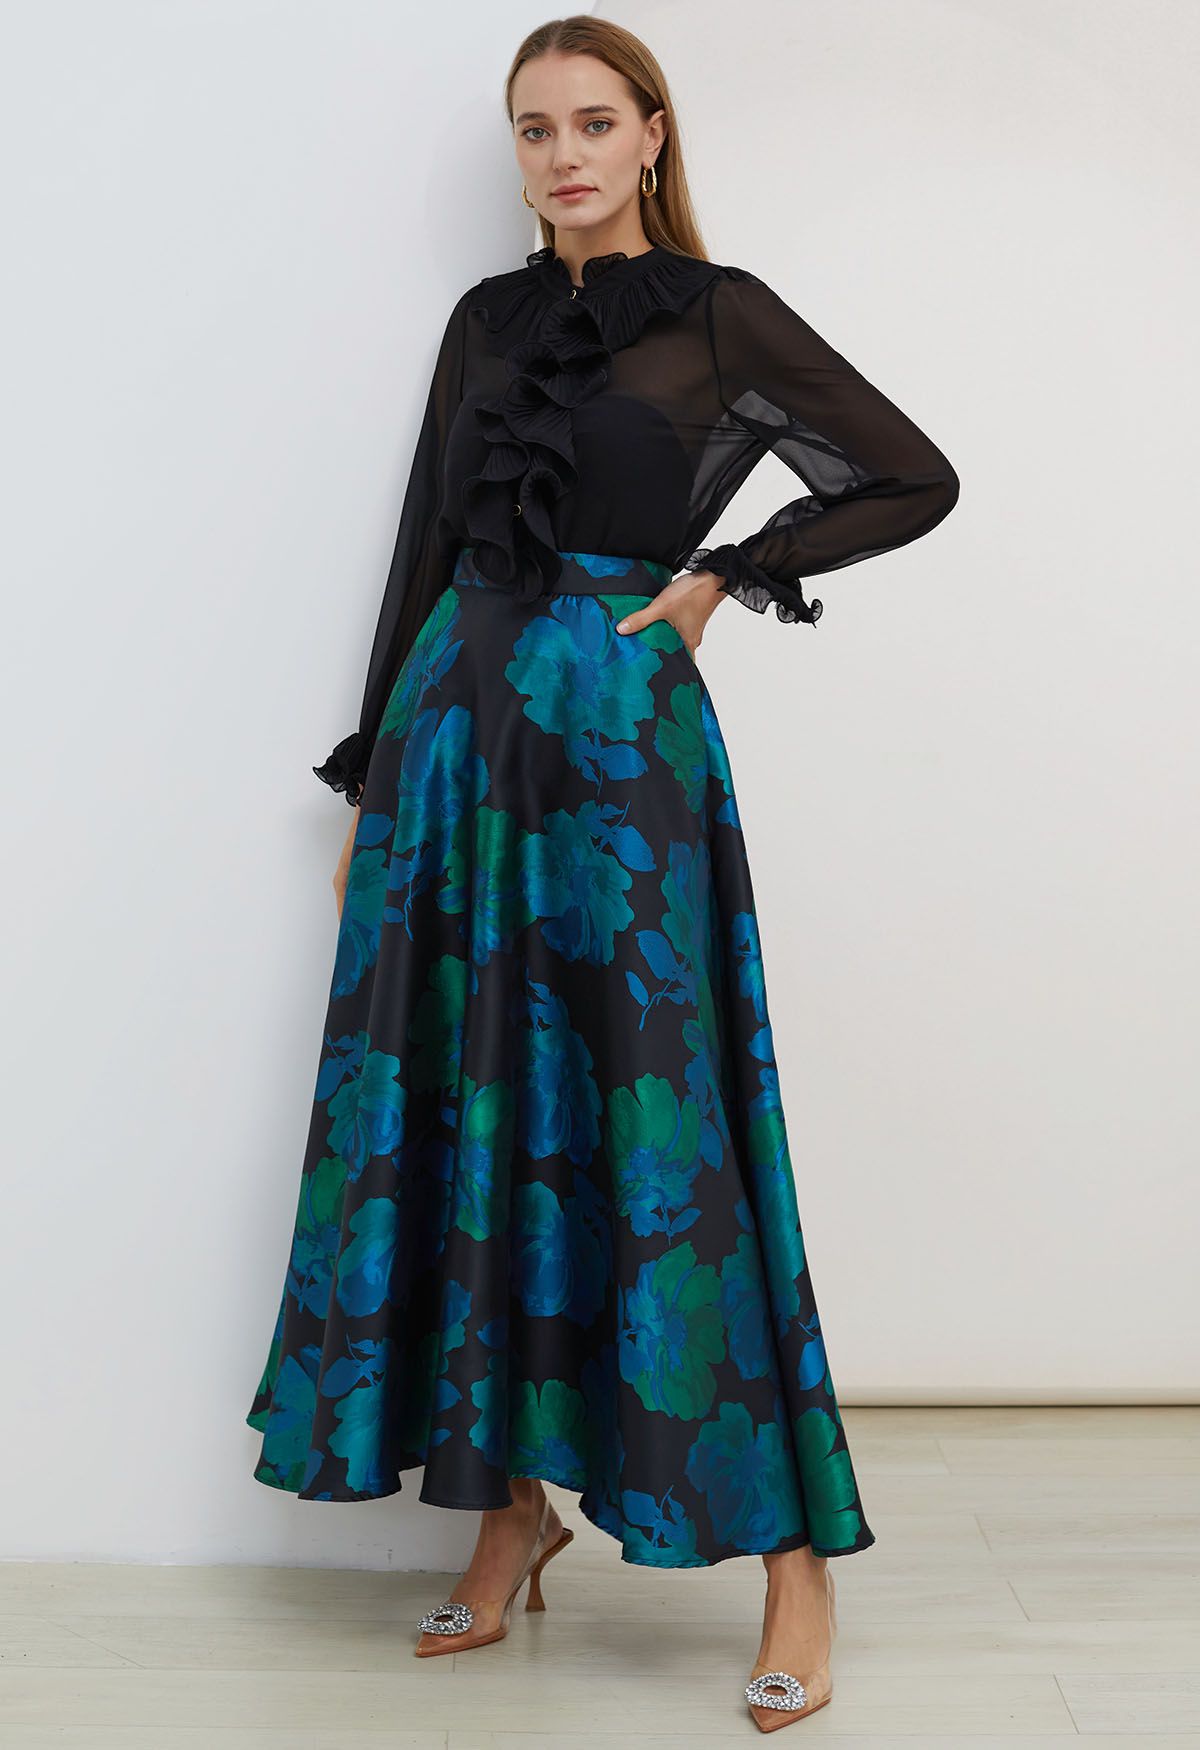 Floral Melody Jacquard A-Line Maxi Skirt in Teal